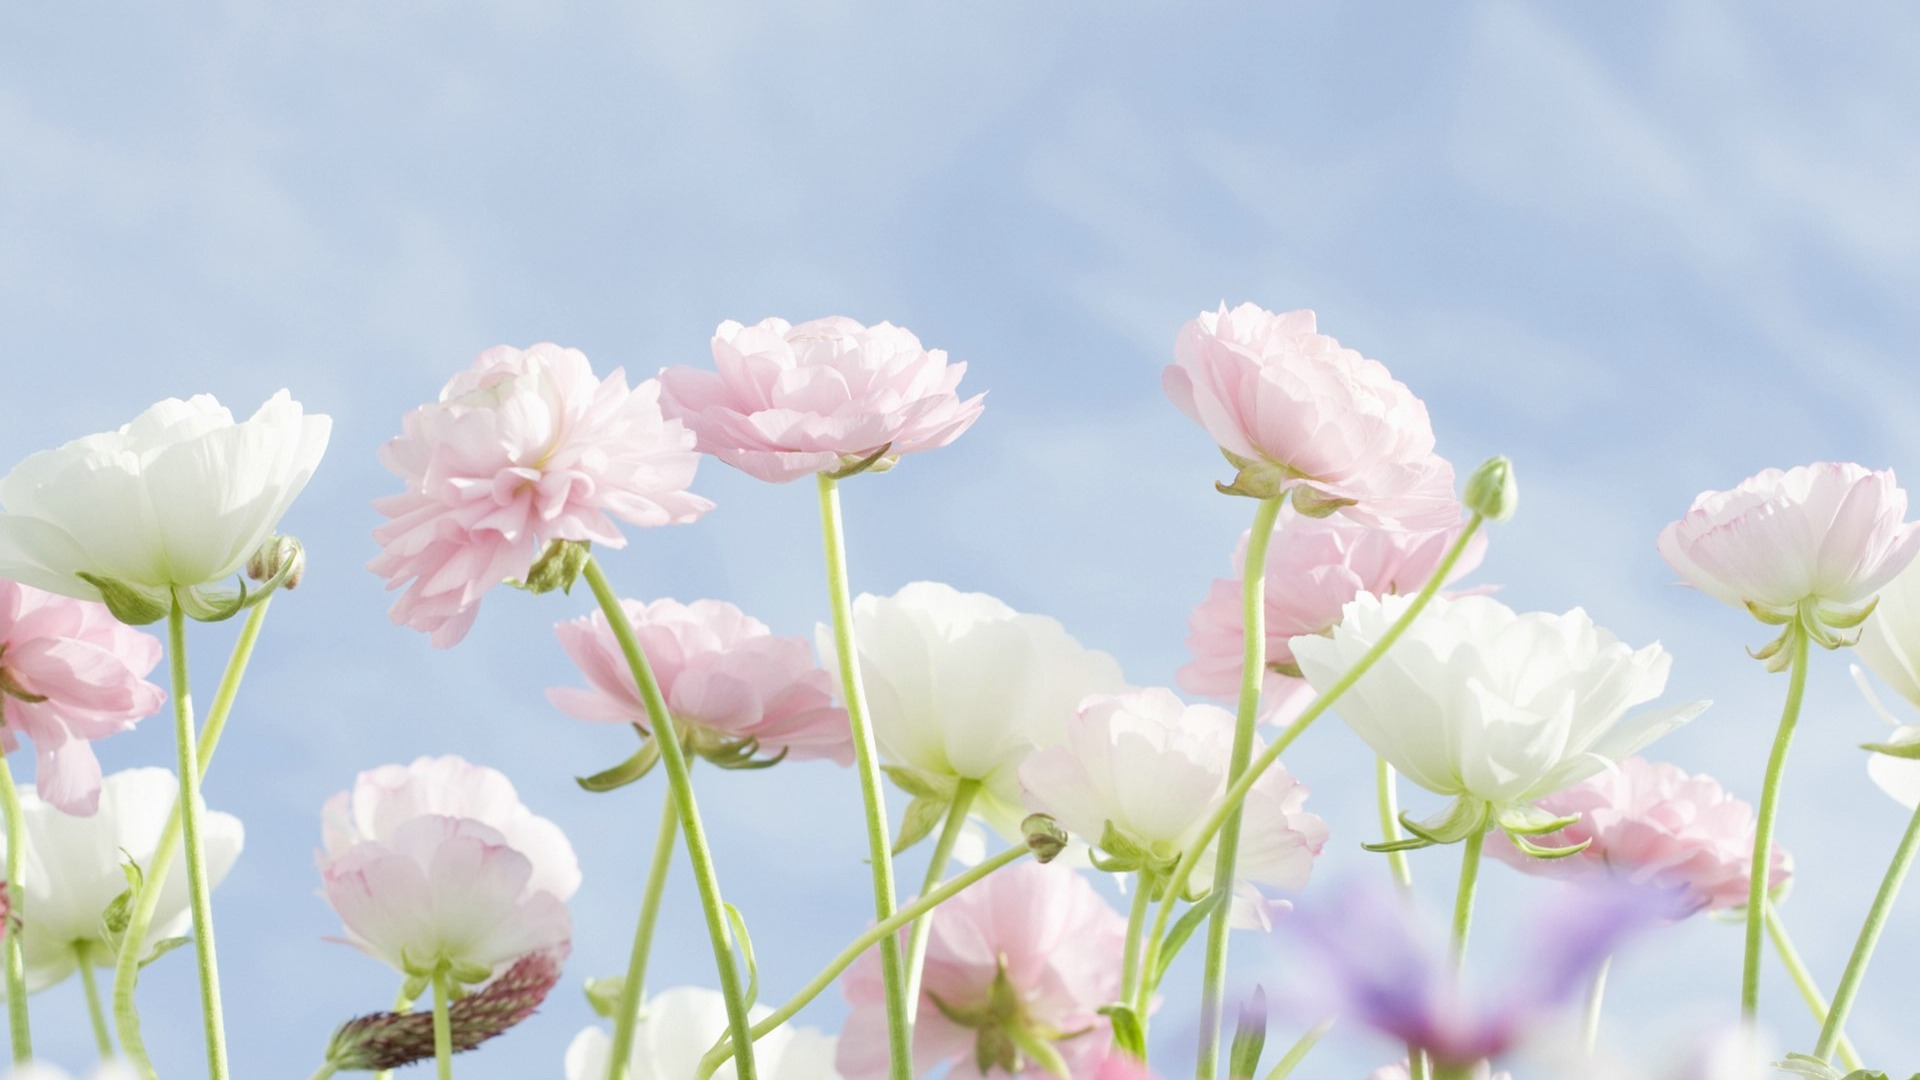 Fresh style Flowers Wallpapers #31 - 1920x1080